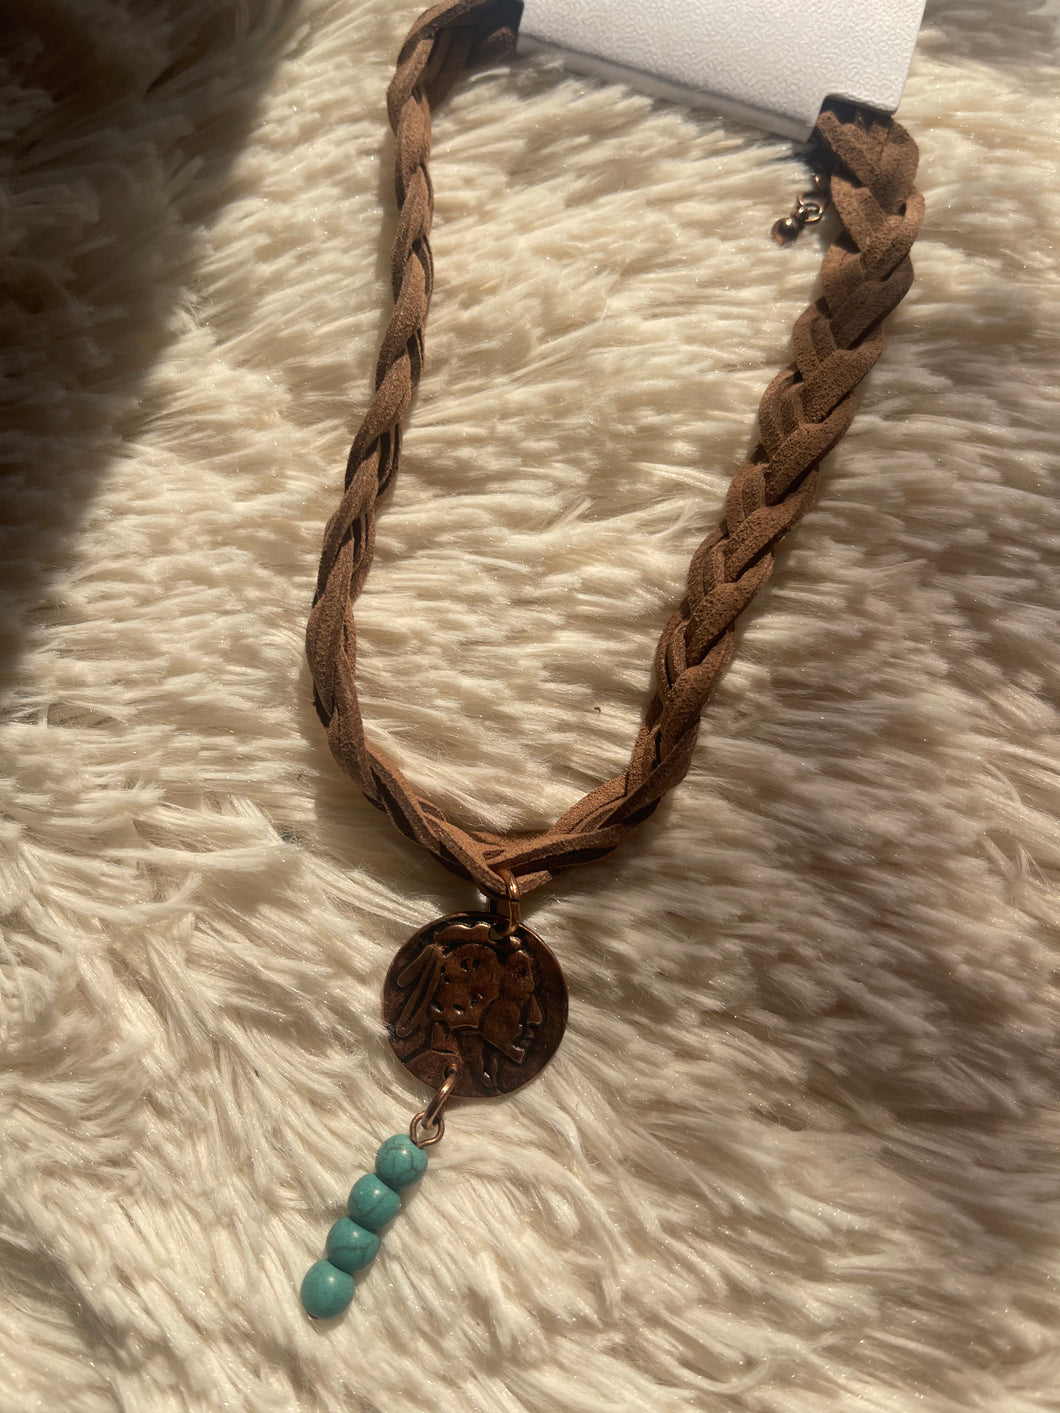 Woven Indian Necklace